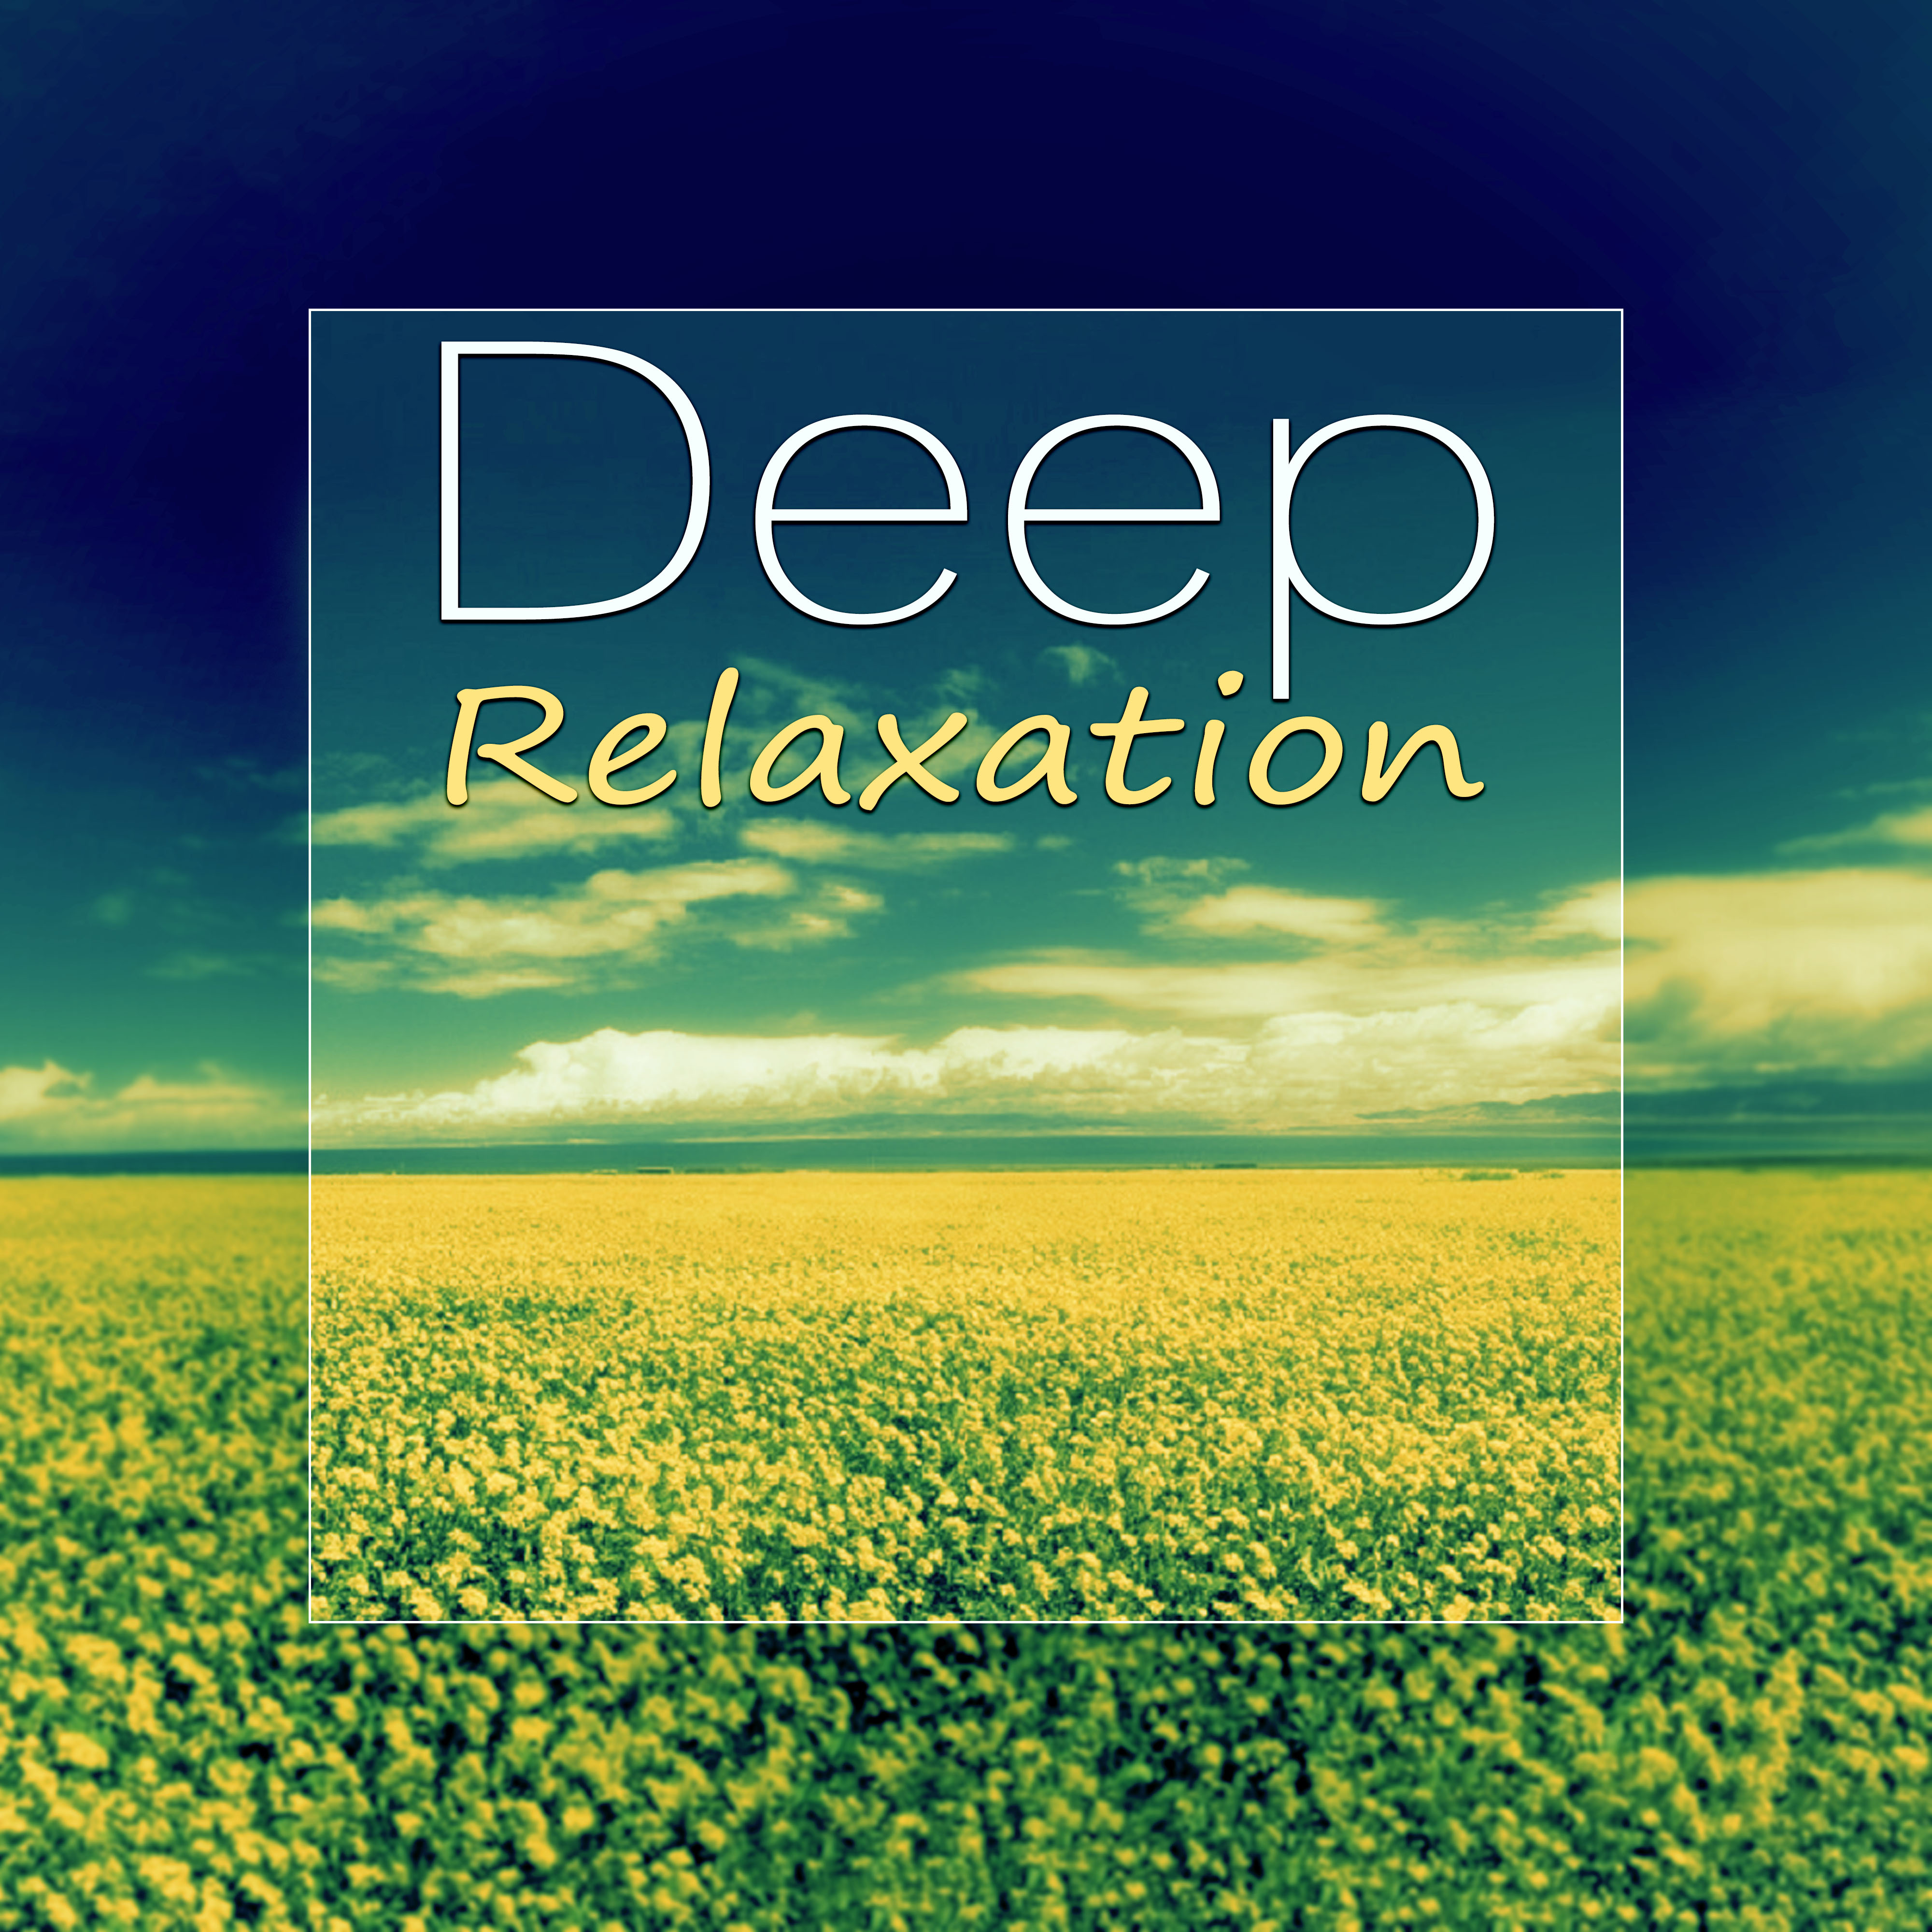 Deep Relaxation - Healing Music, Soul Relax, Sounds for Relaxation, Sea Waves Sounds, Quiet Nature, Calm Noise